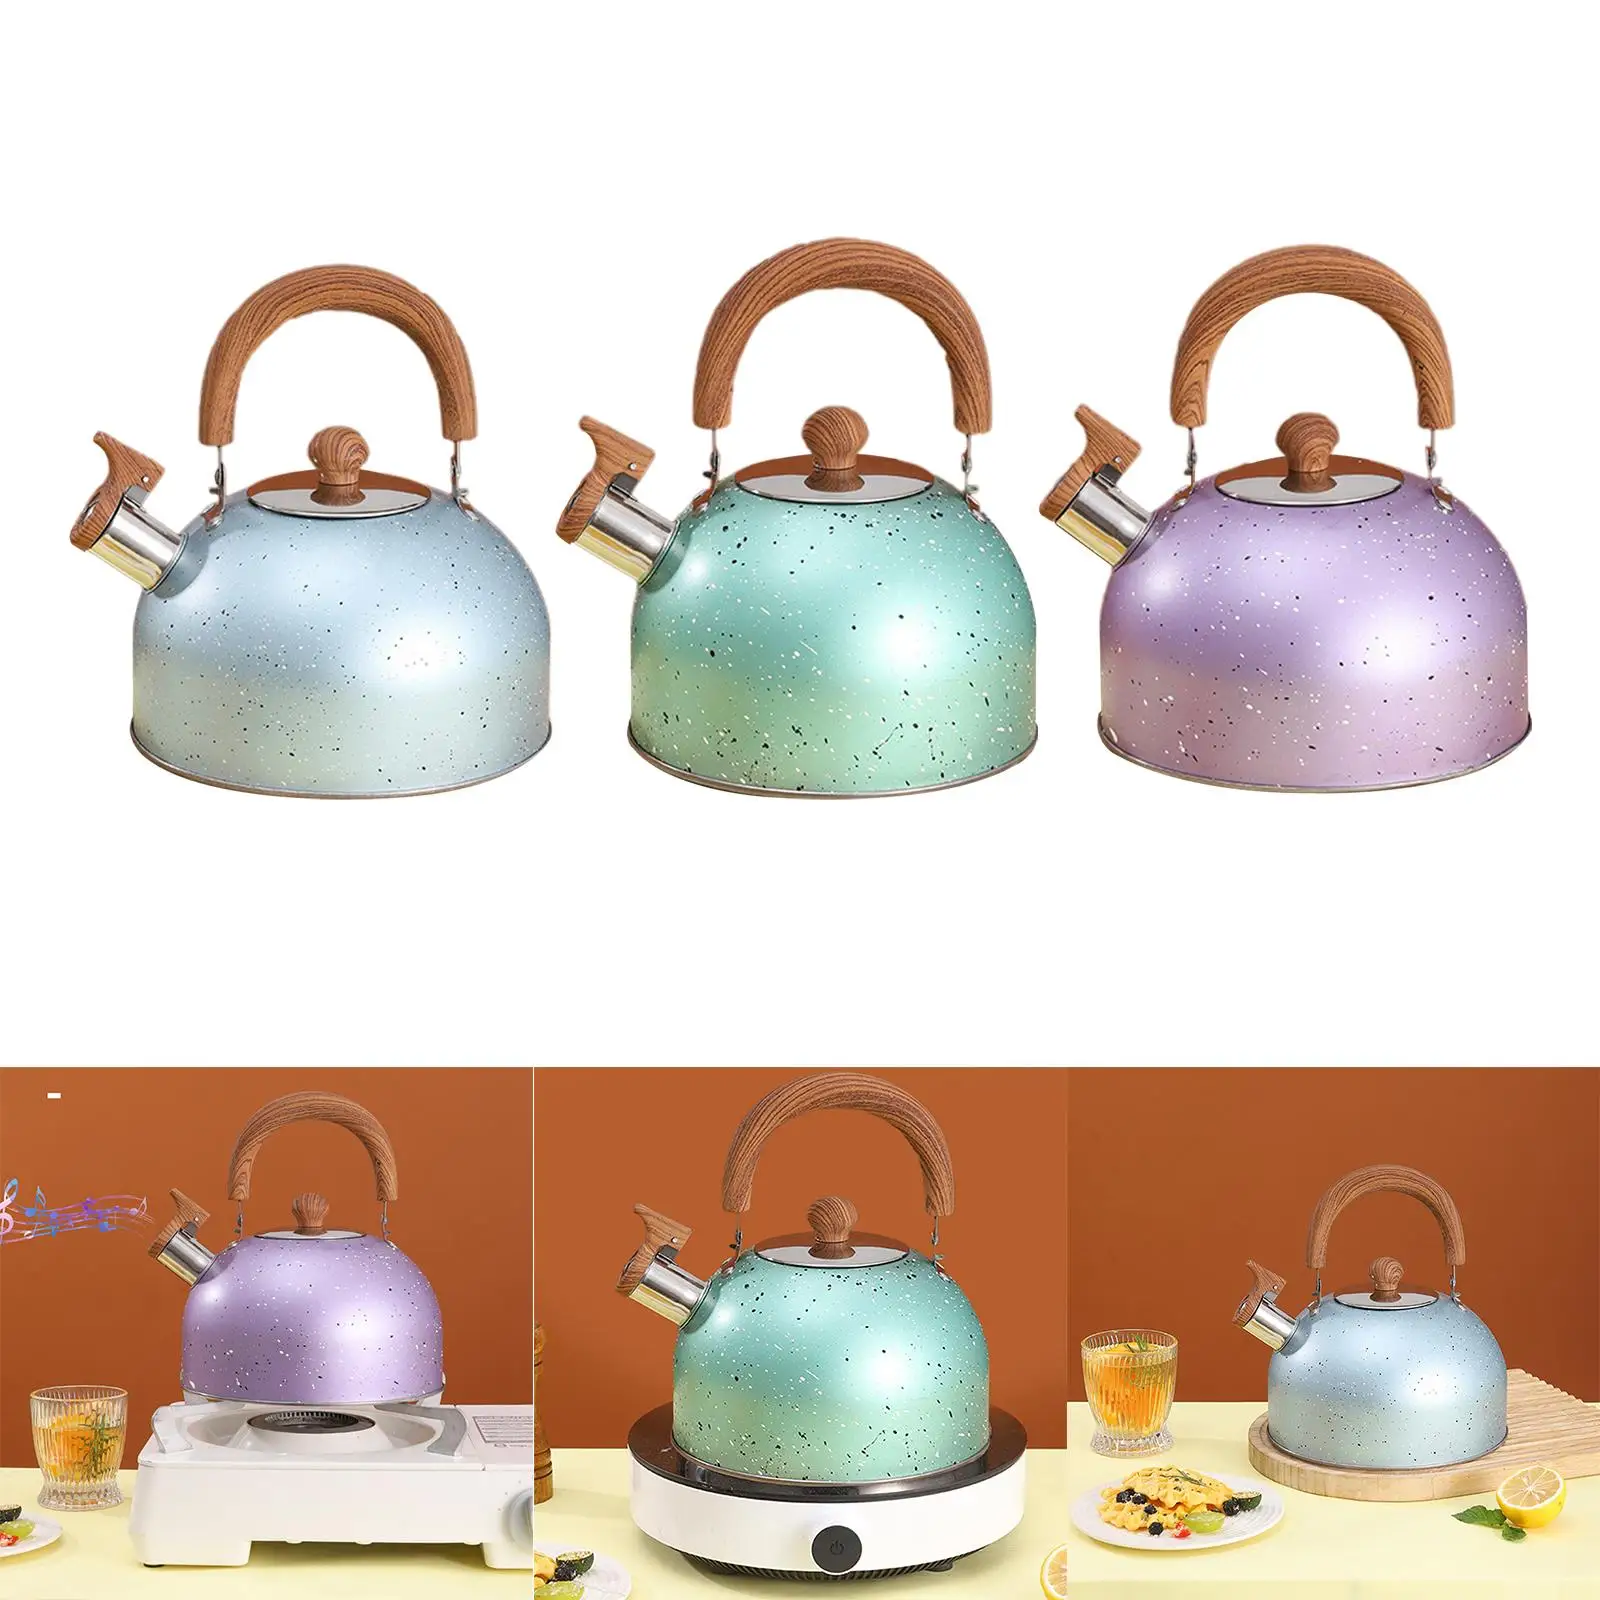 Audible Whistling Water Kettle Wooden Handle for All Stove Sources Teapot